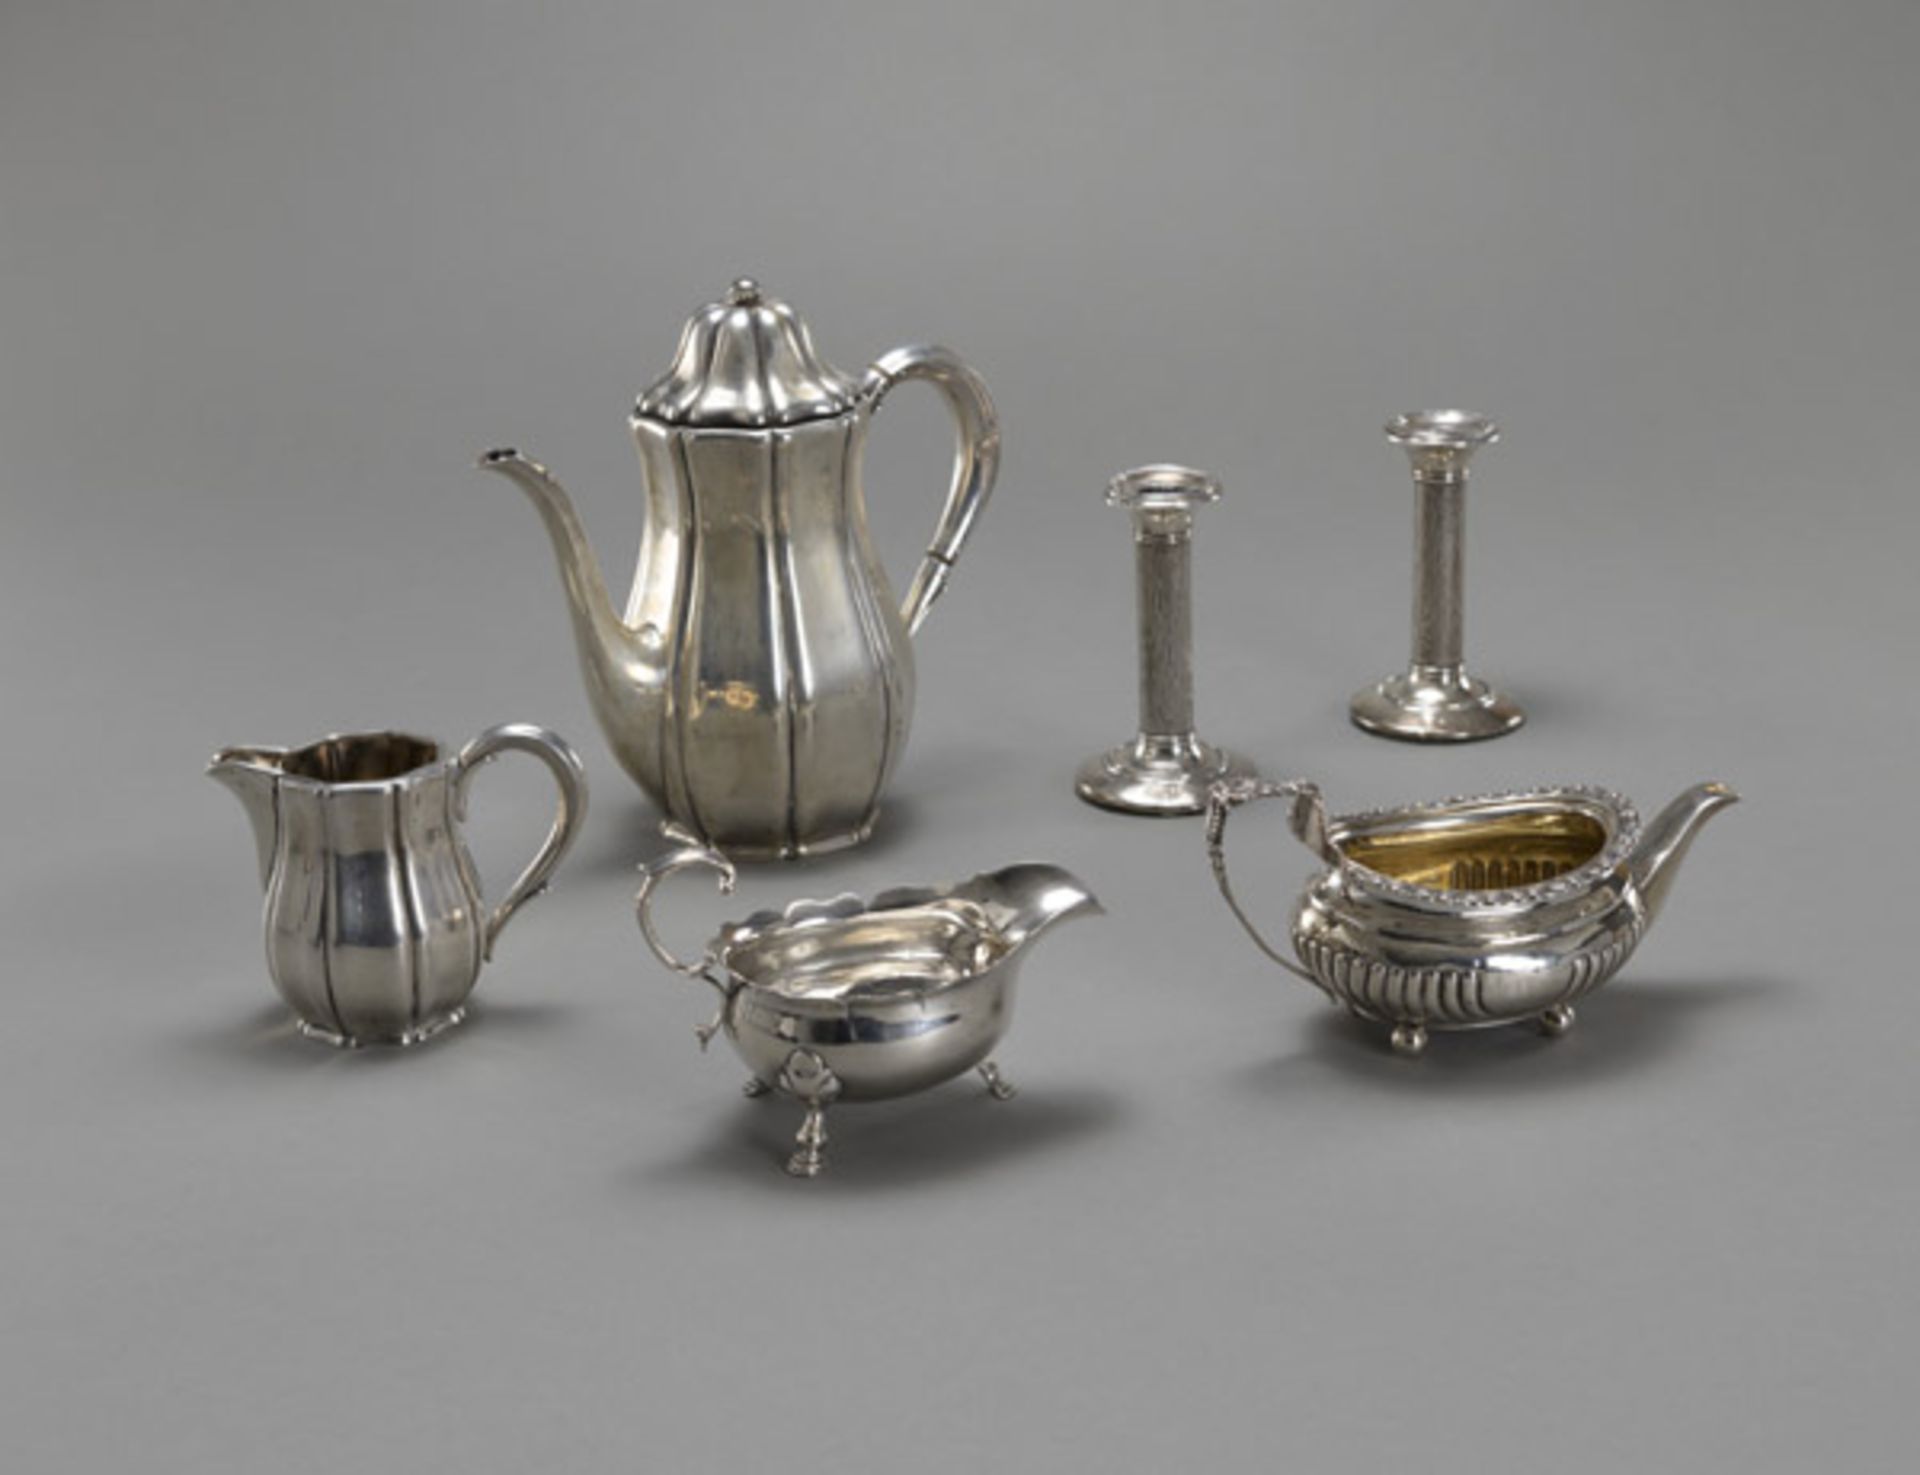 TWO SAUCE BOATS,  A COFFEE POT, A MILK POT, CANDLESTICKS - Image 2 of 4